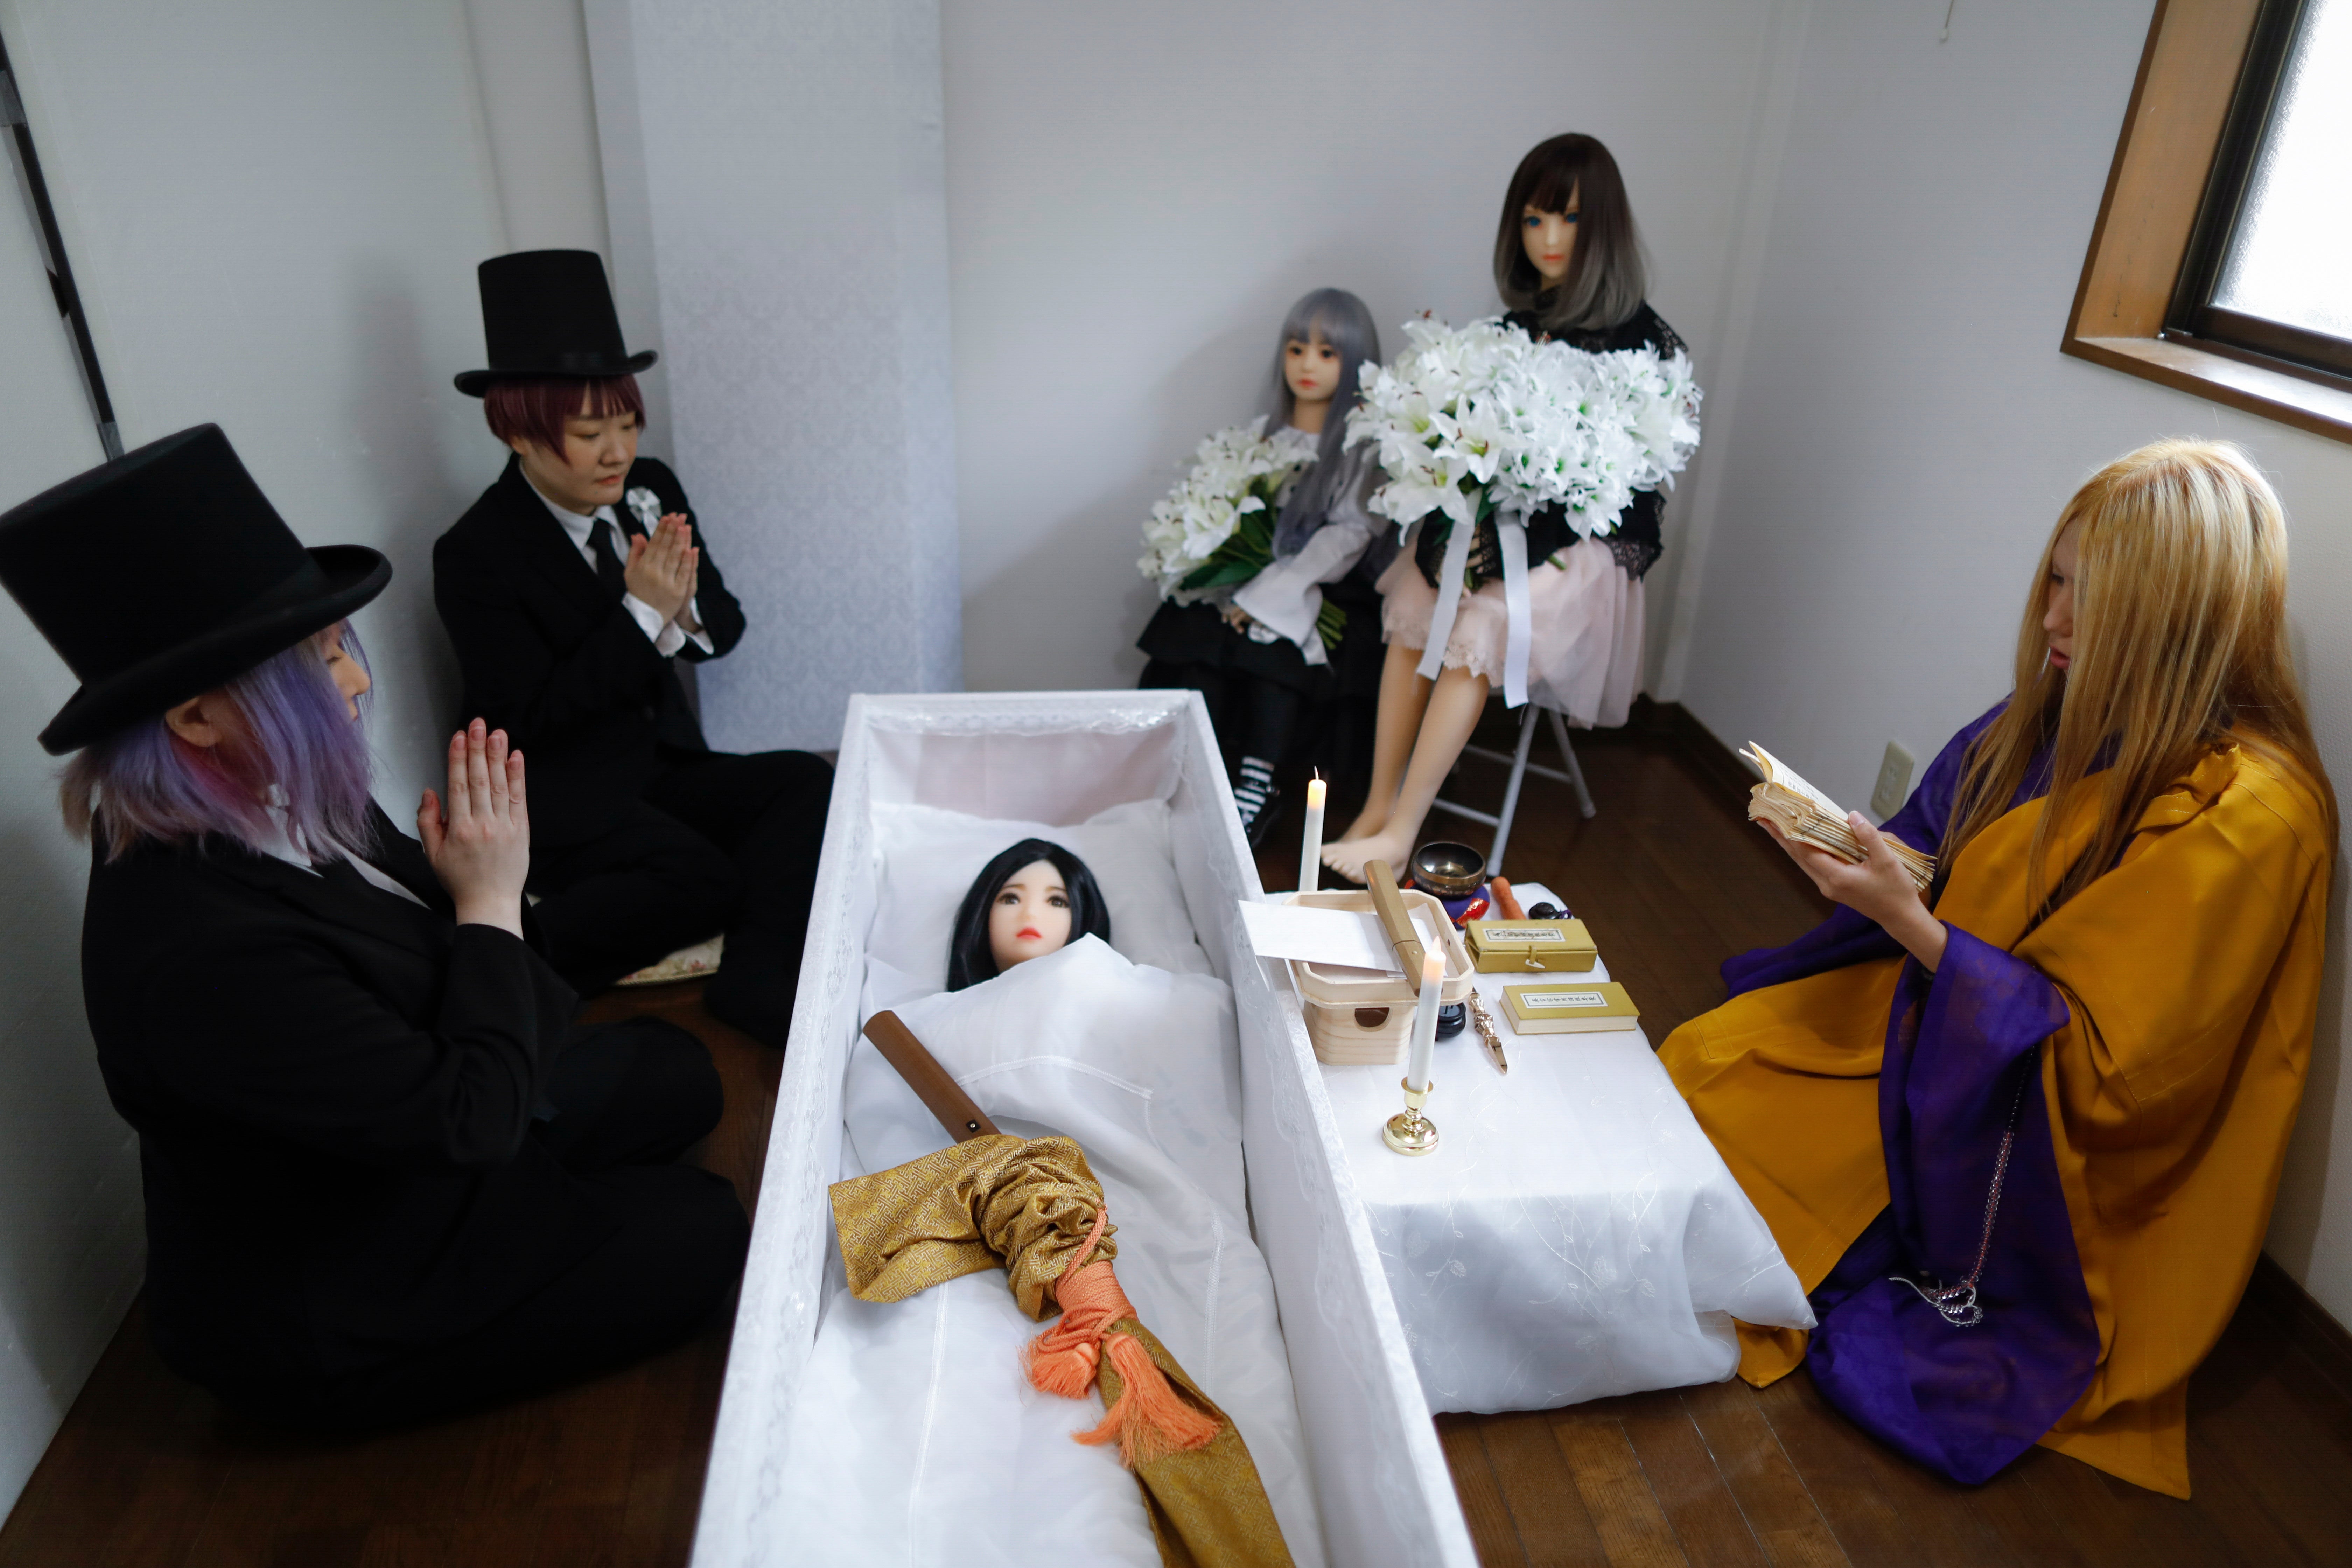 Mourners attend a funeral service for a sex doll named Ran